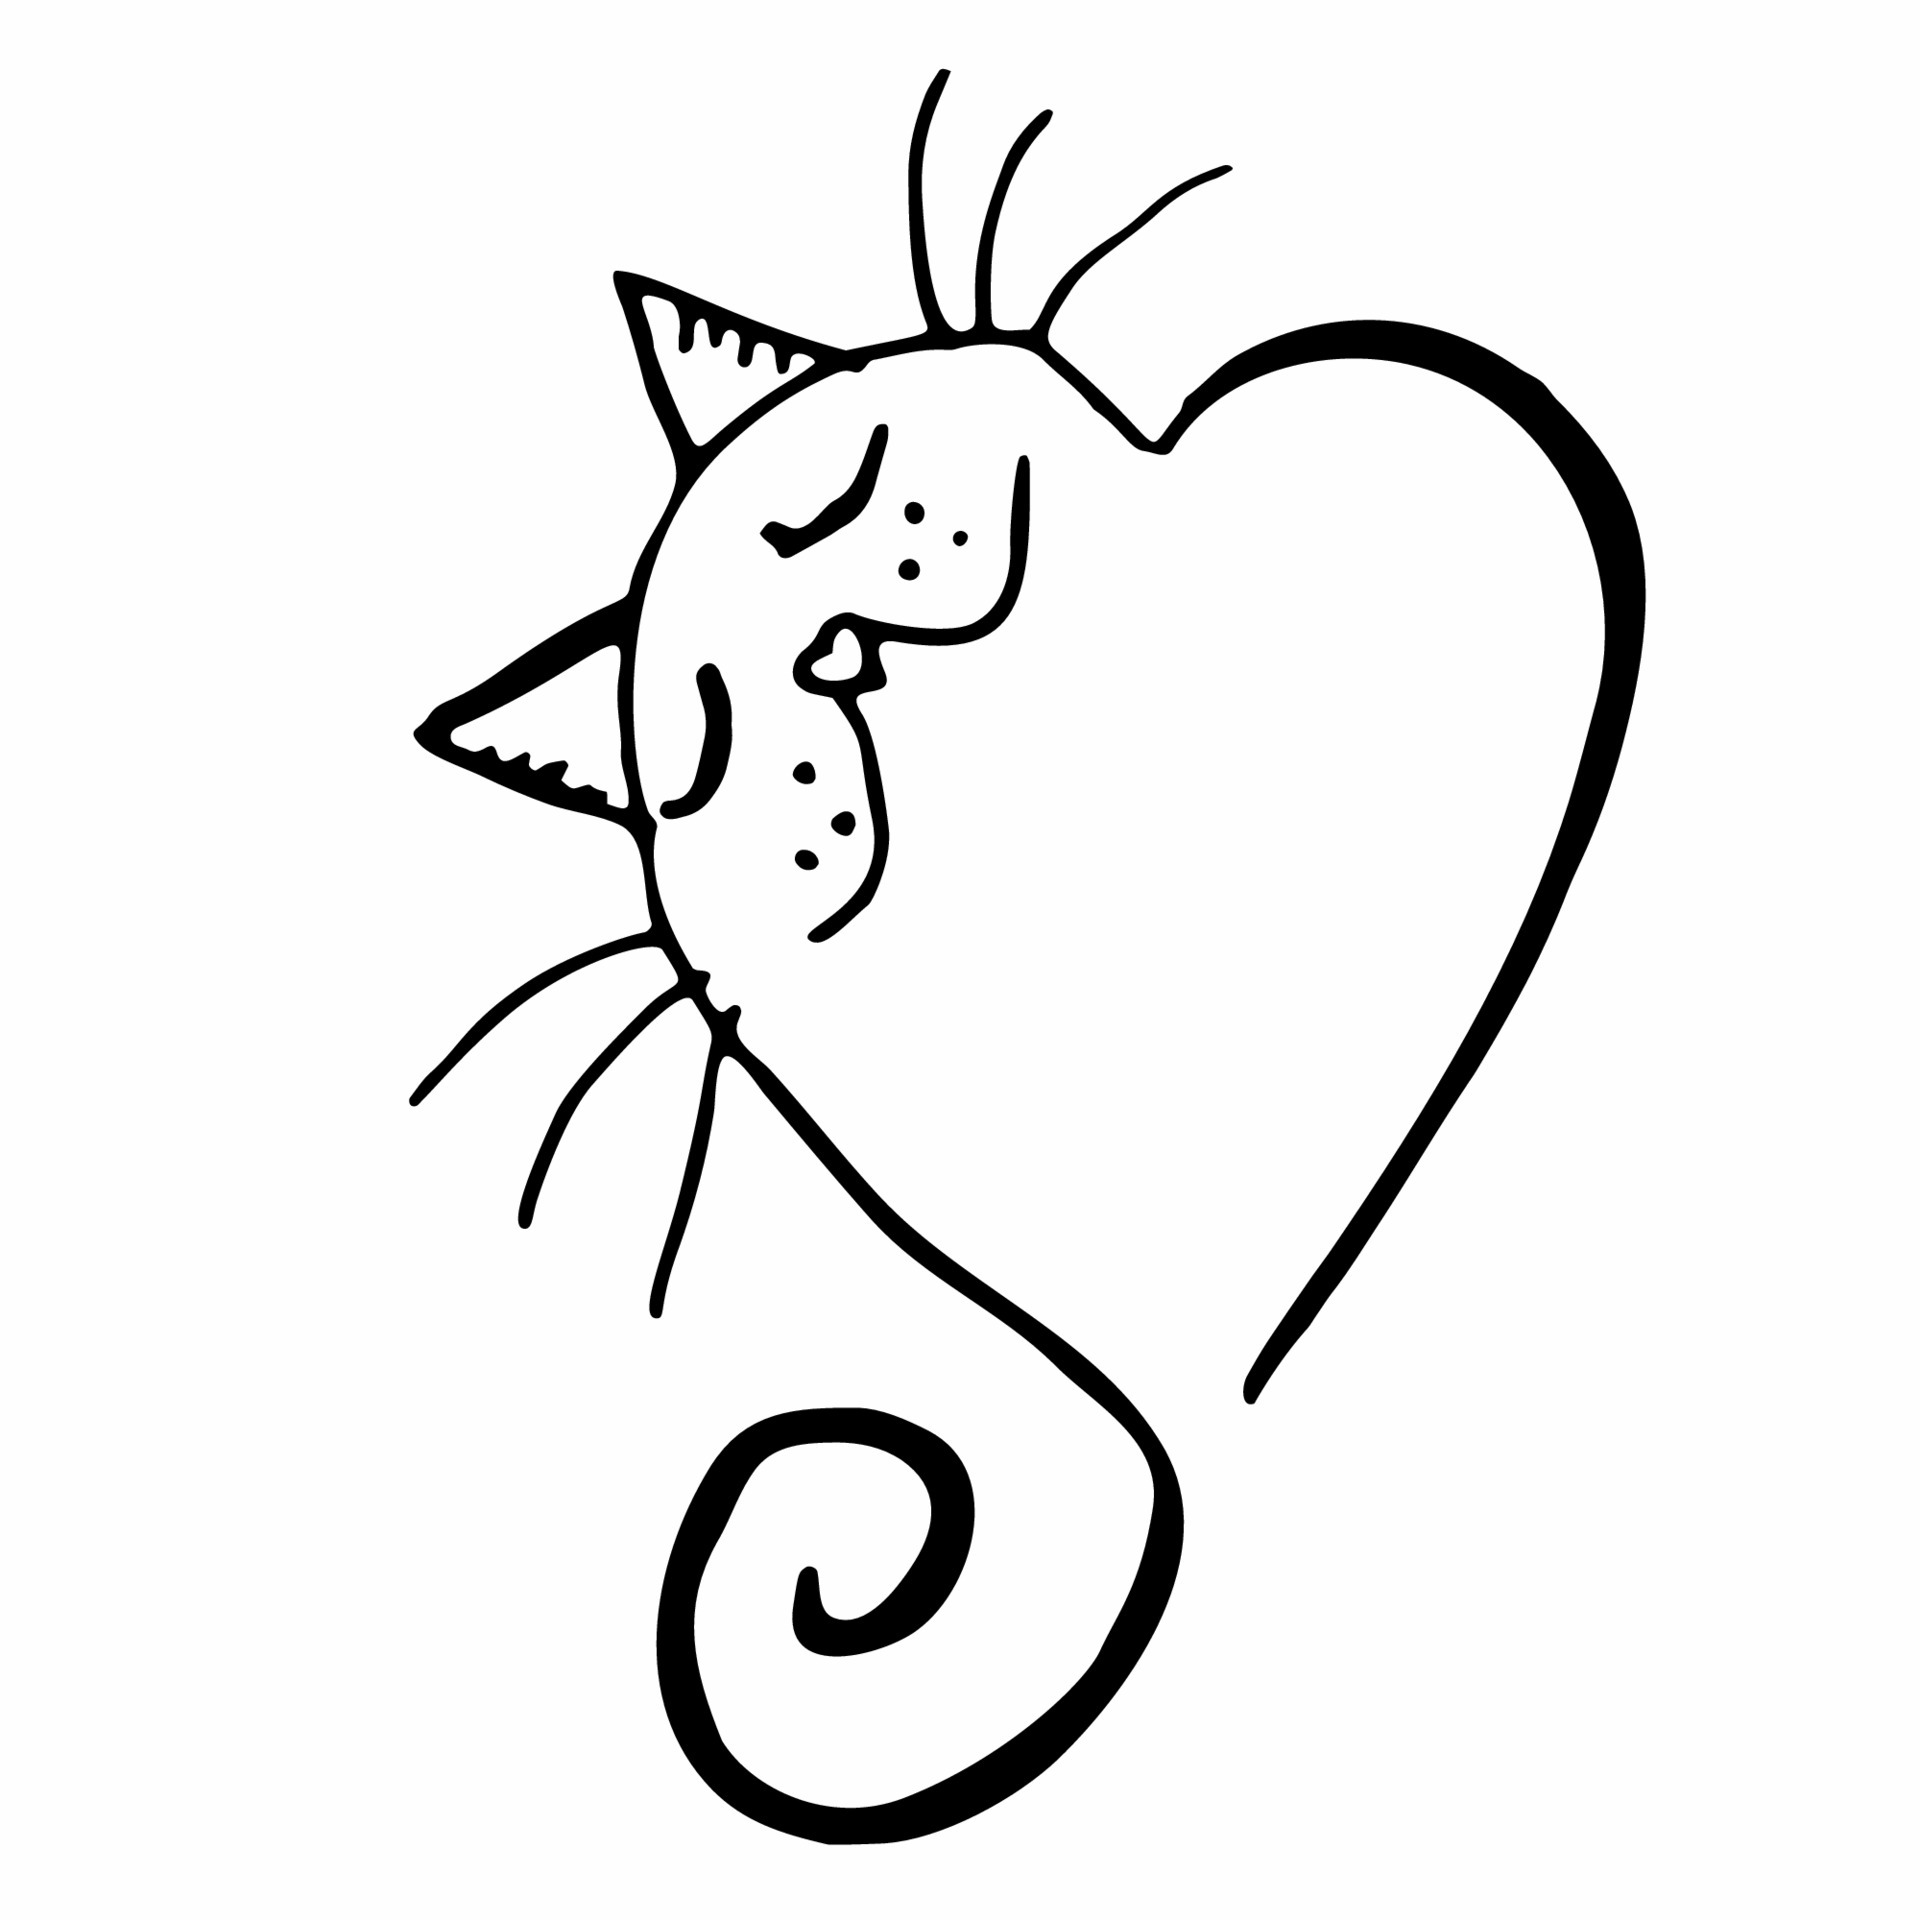 Animal love symbol paw print with heart, isolated vector eps 10 5911818 ...